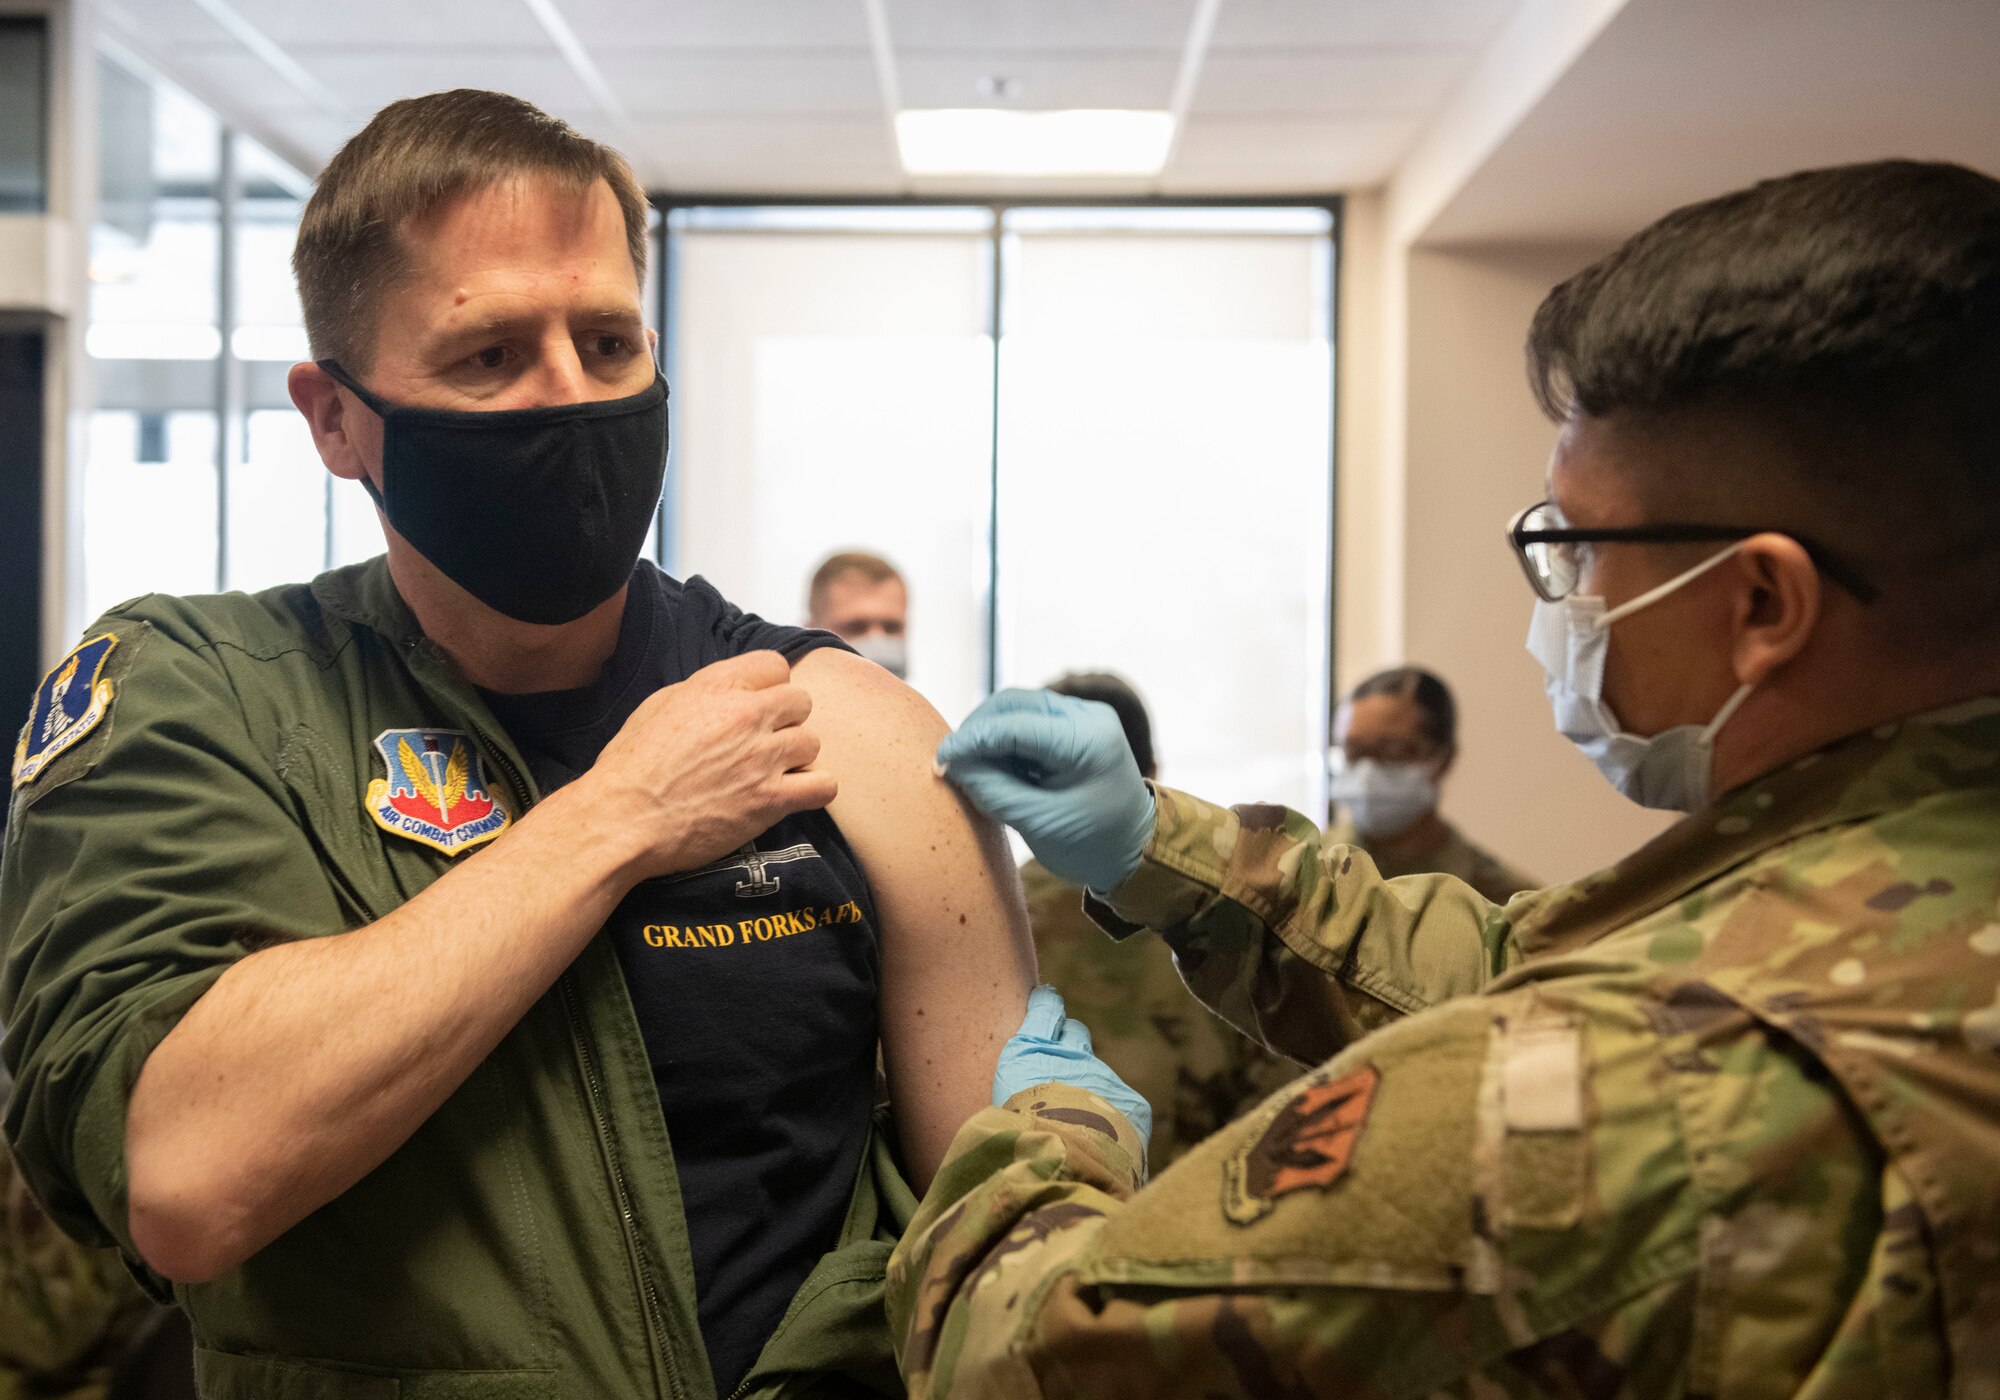 Senior Airman Brandon Ordonez, 319th Health Care Operations Squadron aerospace medical technician, administers a COVID-19 vaccine to Col. Cameron Pringle, 319th Reconnaissance Wing commander, at Grand Forks Air Force Base, N.D., Jan. 22, 2021. The 319 RW received its first shipment of vaccines on Jan. 21 and vaccinated hundreds of mission-essential personnel.